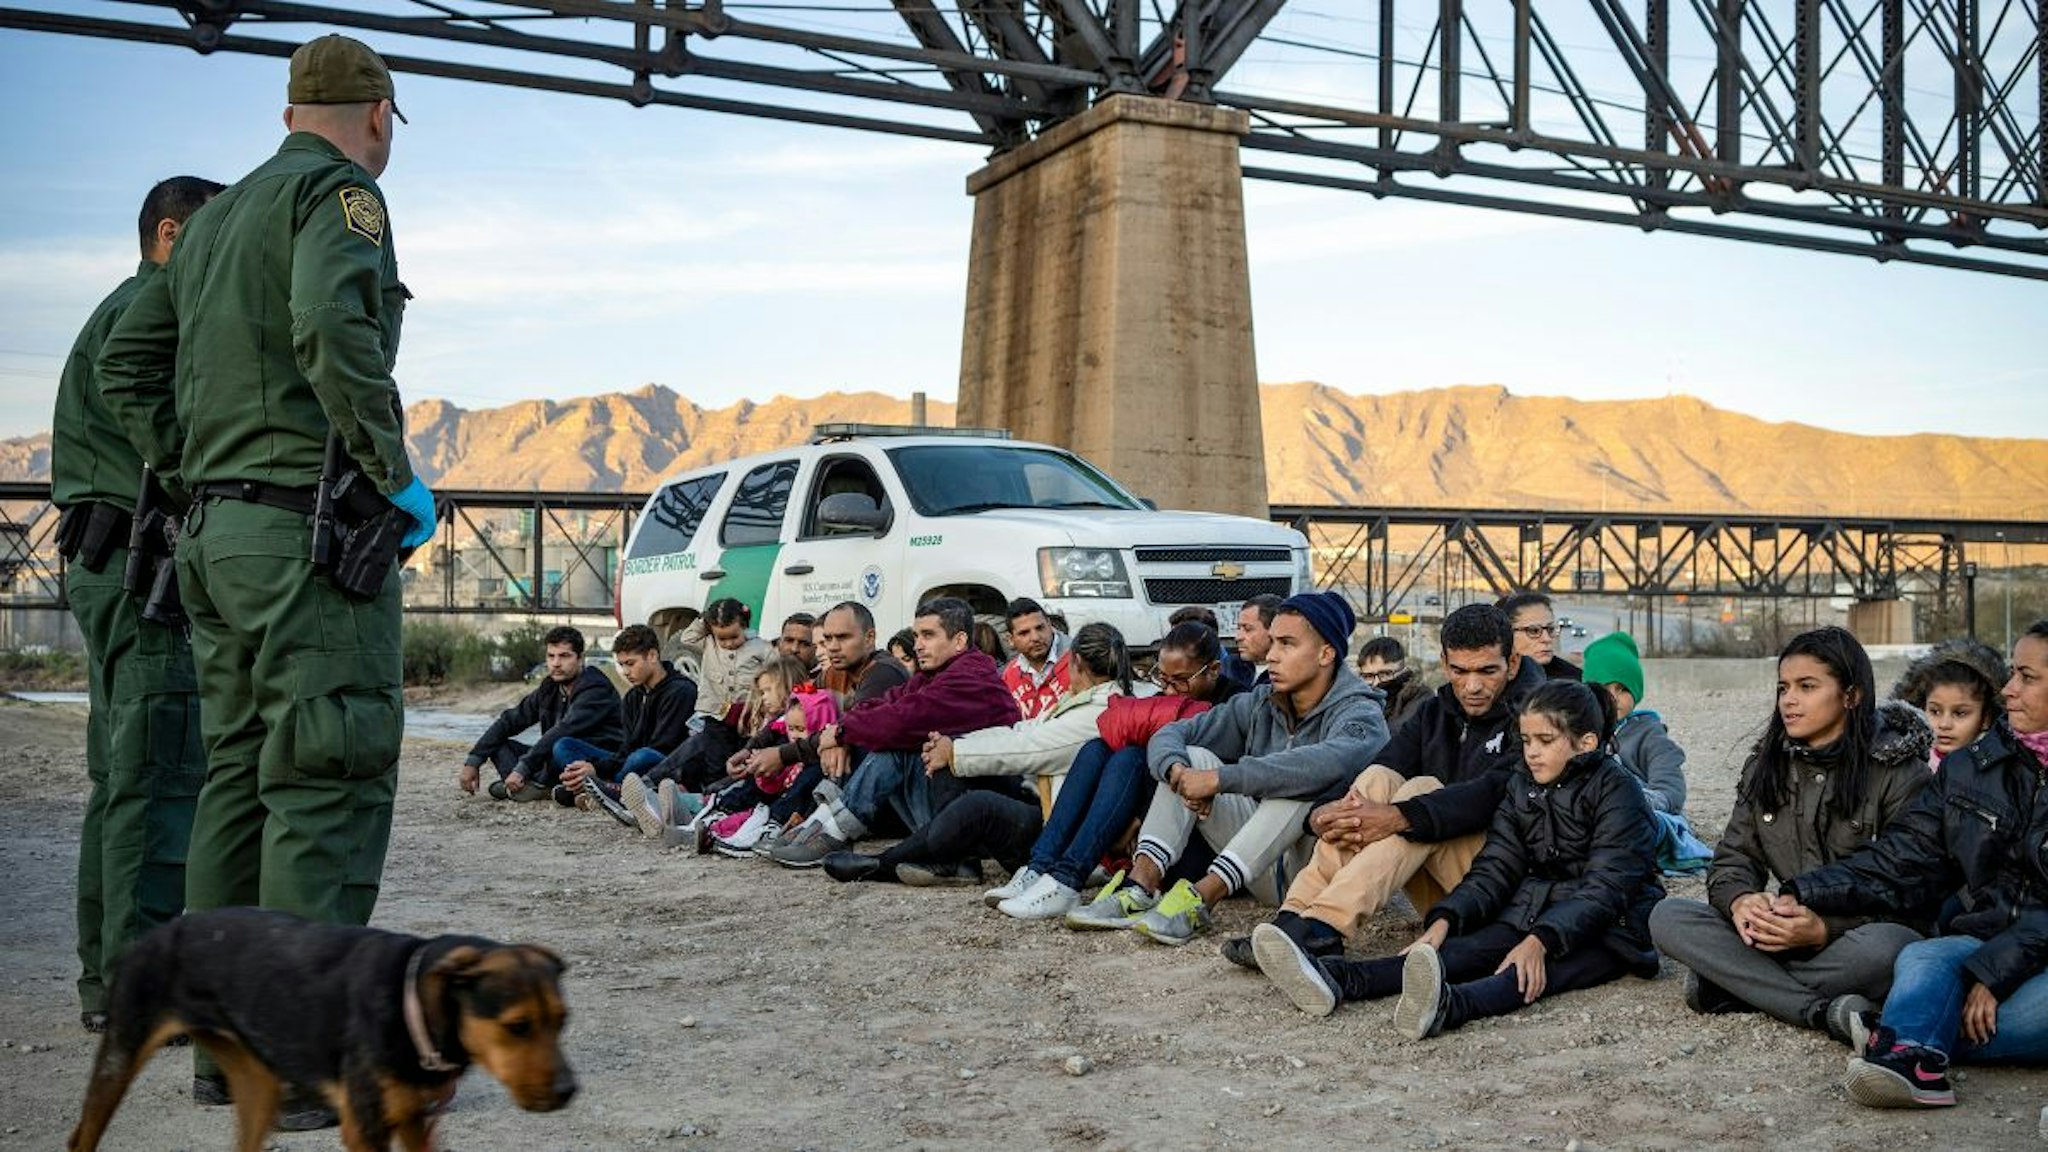 A group of about 30 Brazilian migrants, who had just crossed the border, sit on the ground near US Border Patrol agents, on the property of Jeff Allen, who used to run a brick factory near Mt. Christo Rey on the US-Mexico border in Sunland Park, New Mexico on March 20, 2019.